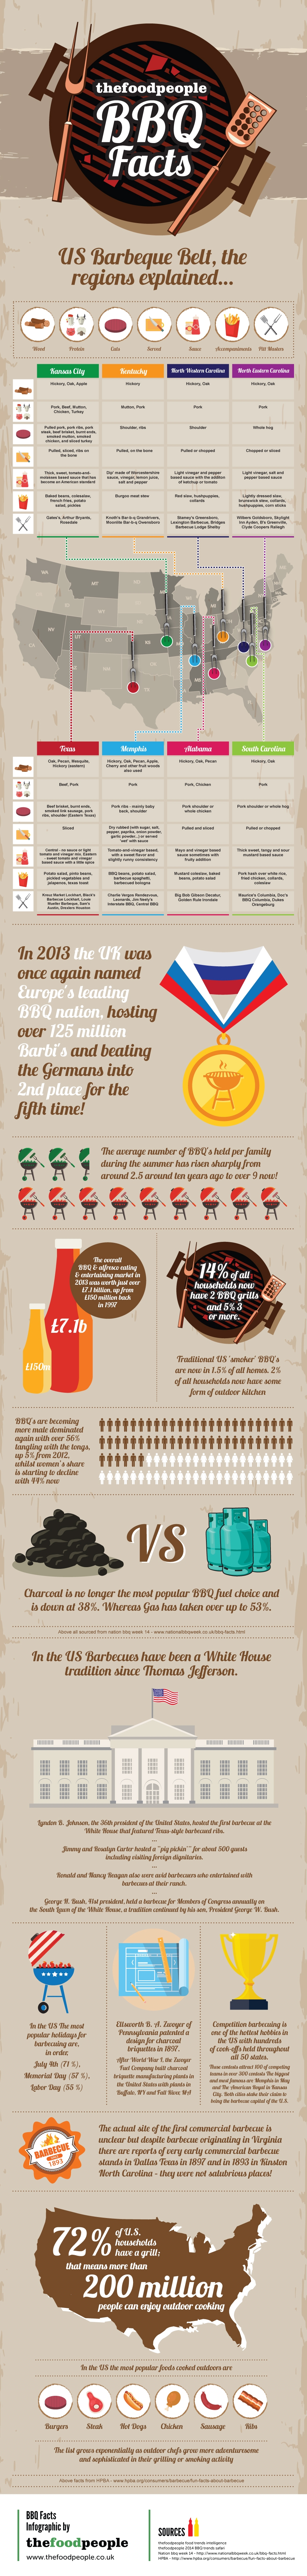 Infographic of BBQ Facts